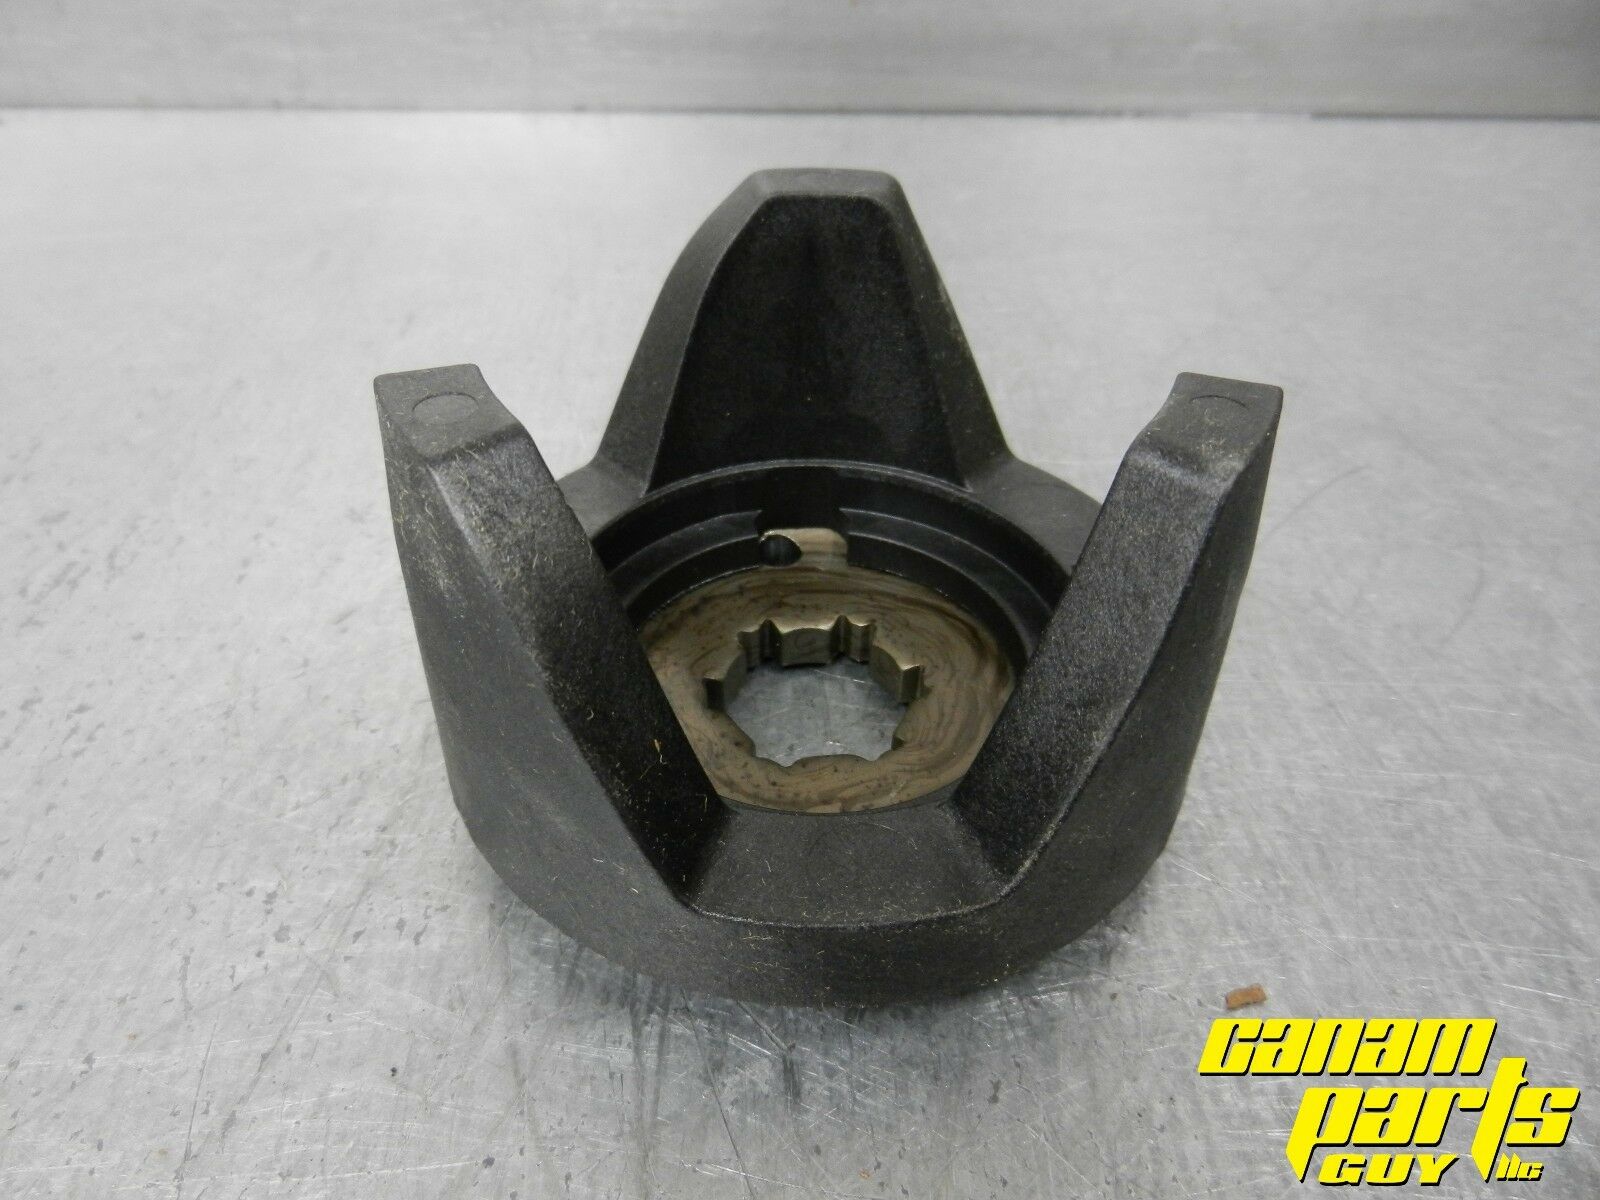 New OEM Helix Cam BLACK 800 1000 With Hole - Canam Parts Guy